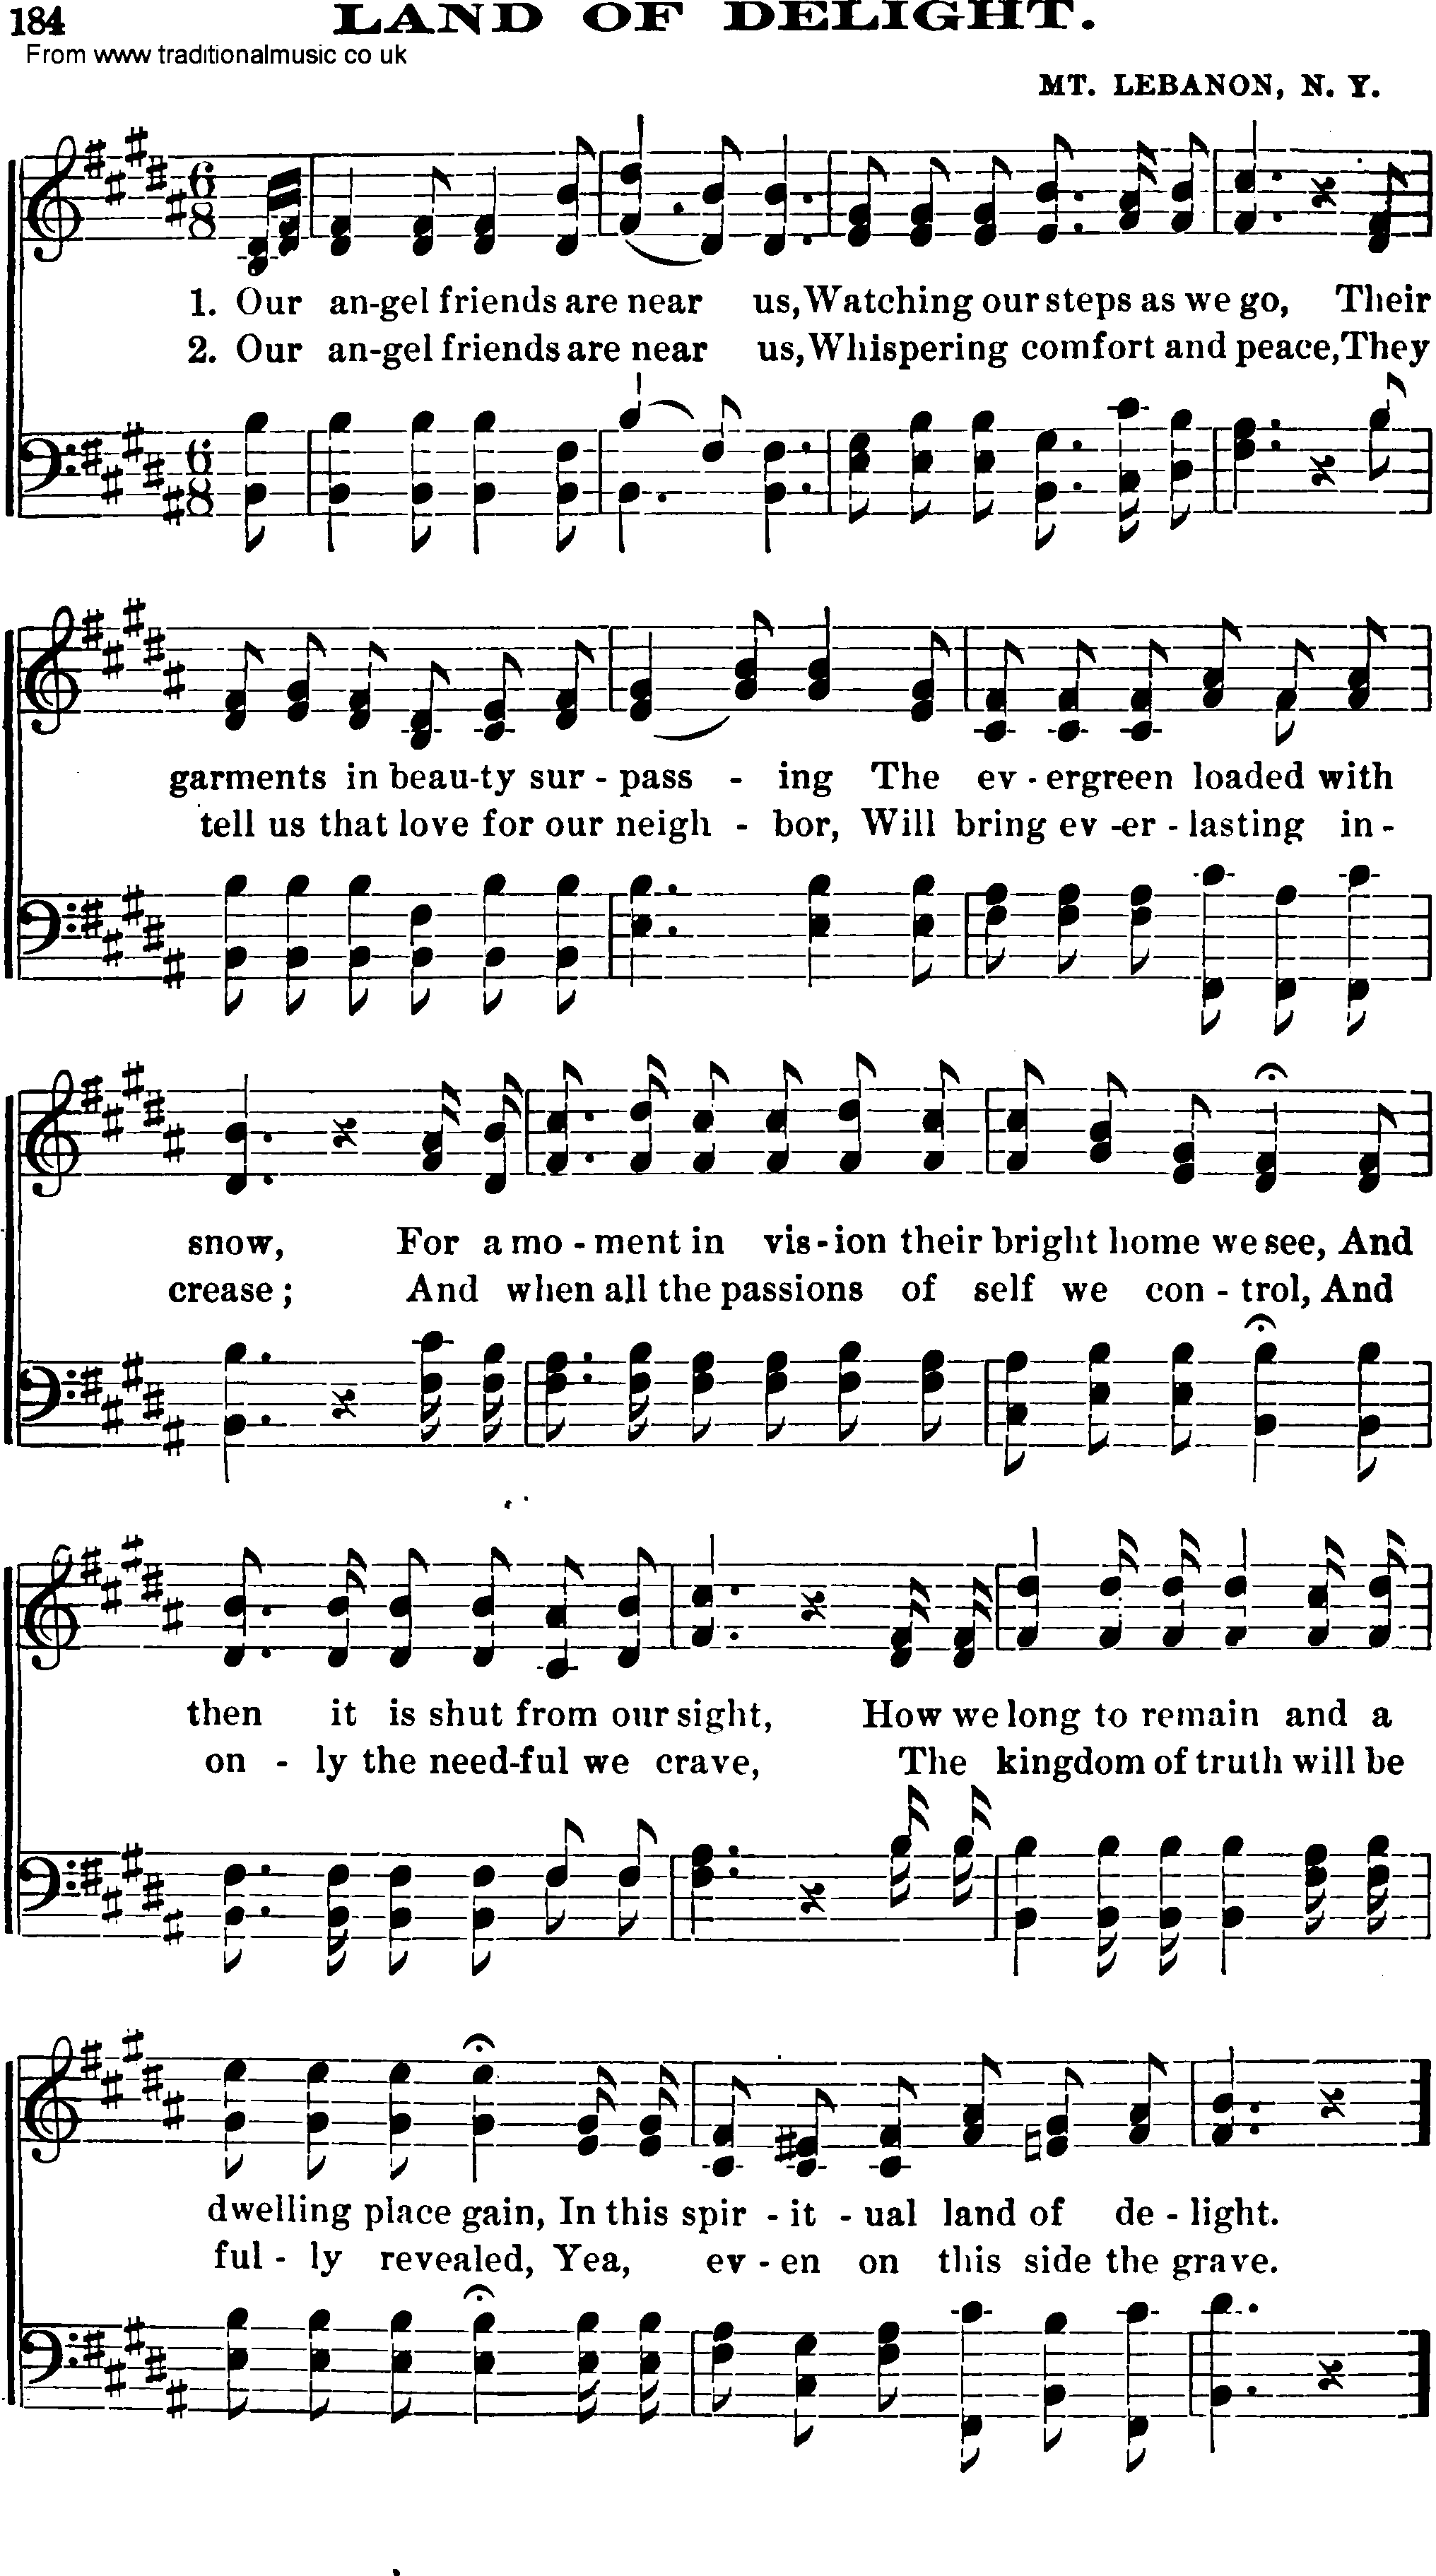 Shaker Music collection, Hymn: Land Of Delight, sheetmusic and PDF